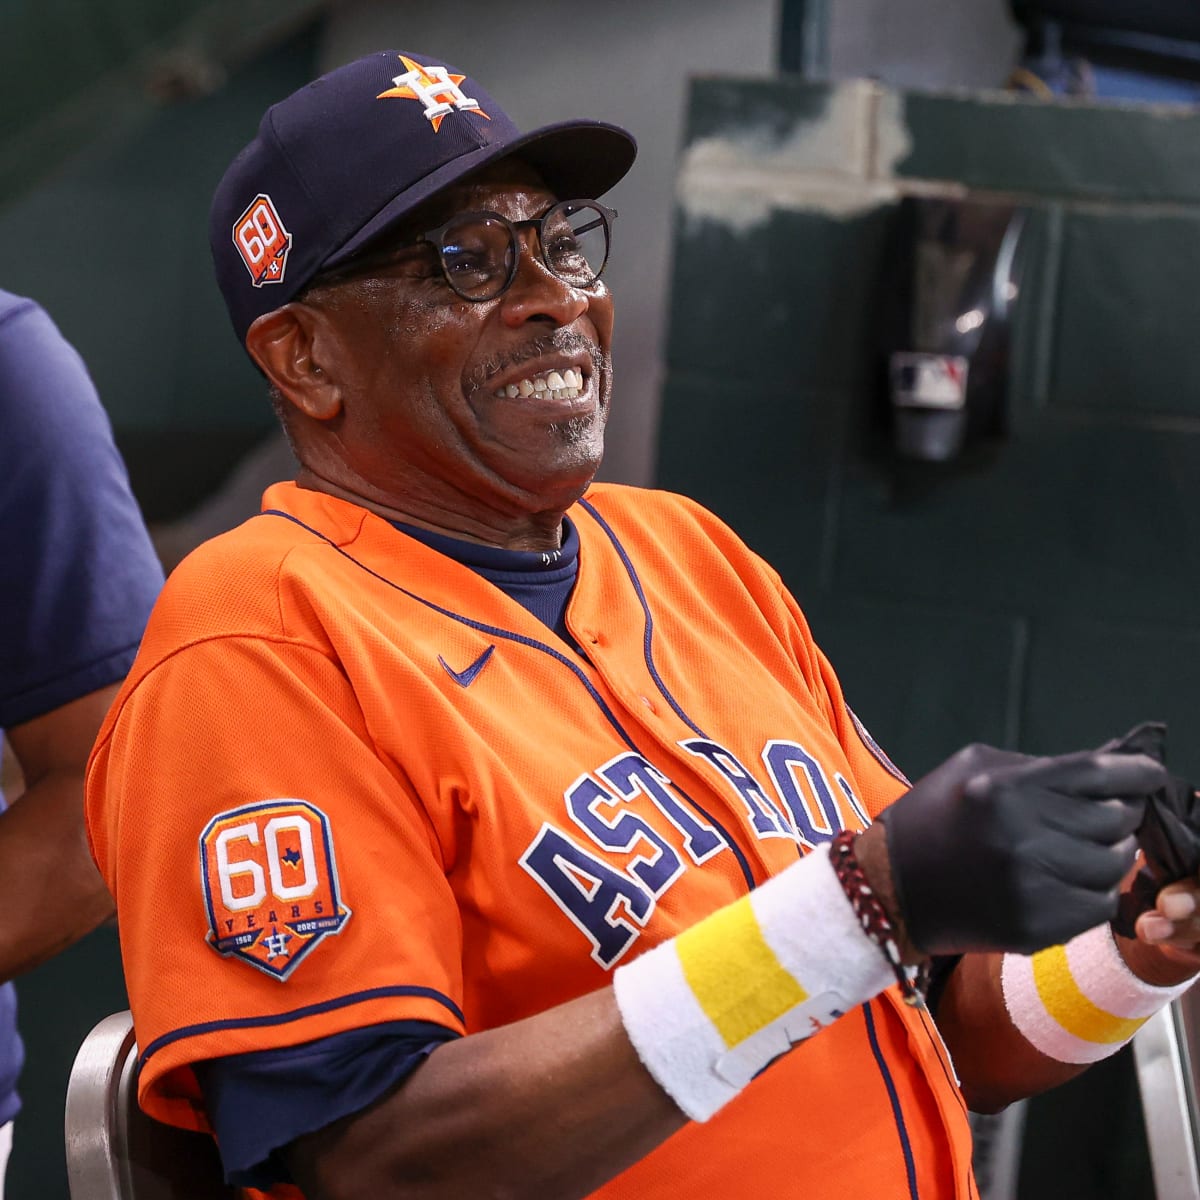 Astros manager Dusty Baker tests positive for COVID-19